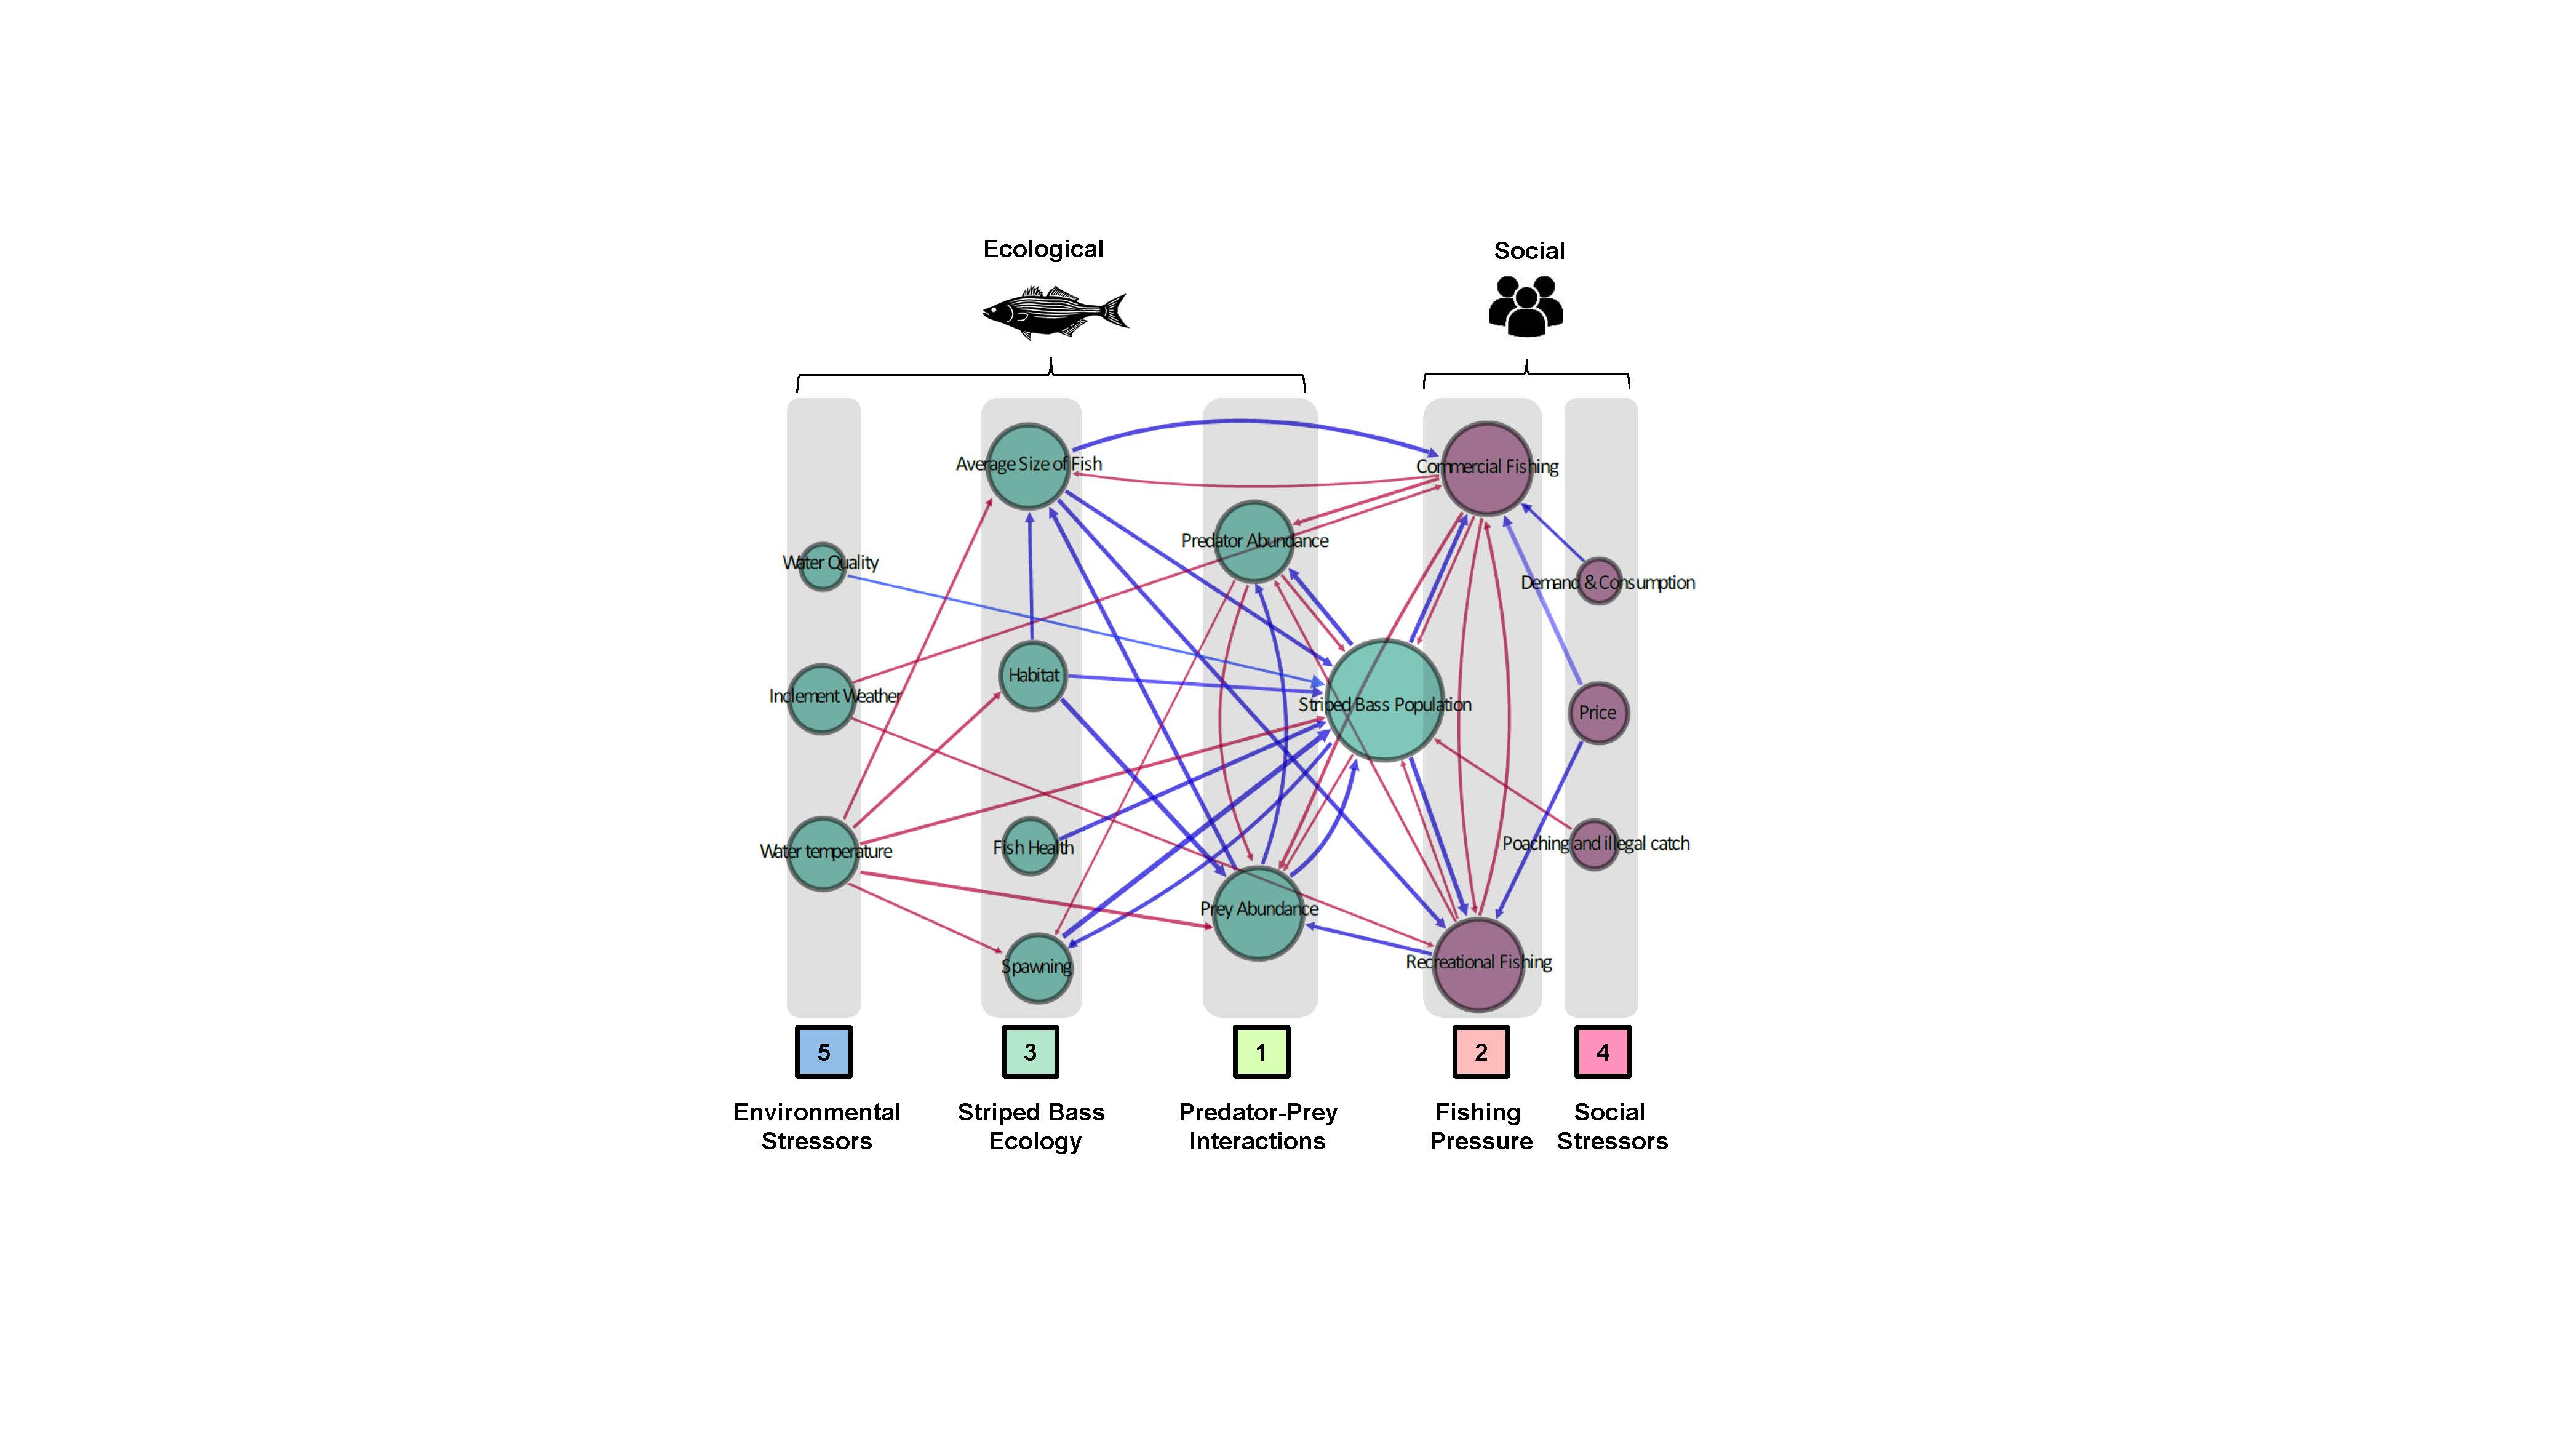 A mental model of the striped bass fishery visualized by components of the system represented by circles and connections between those components represented by lines, connected together in a web-like fashion.